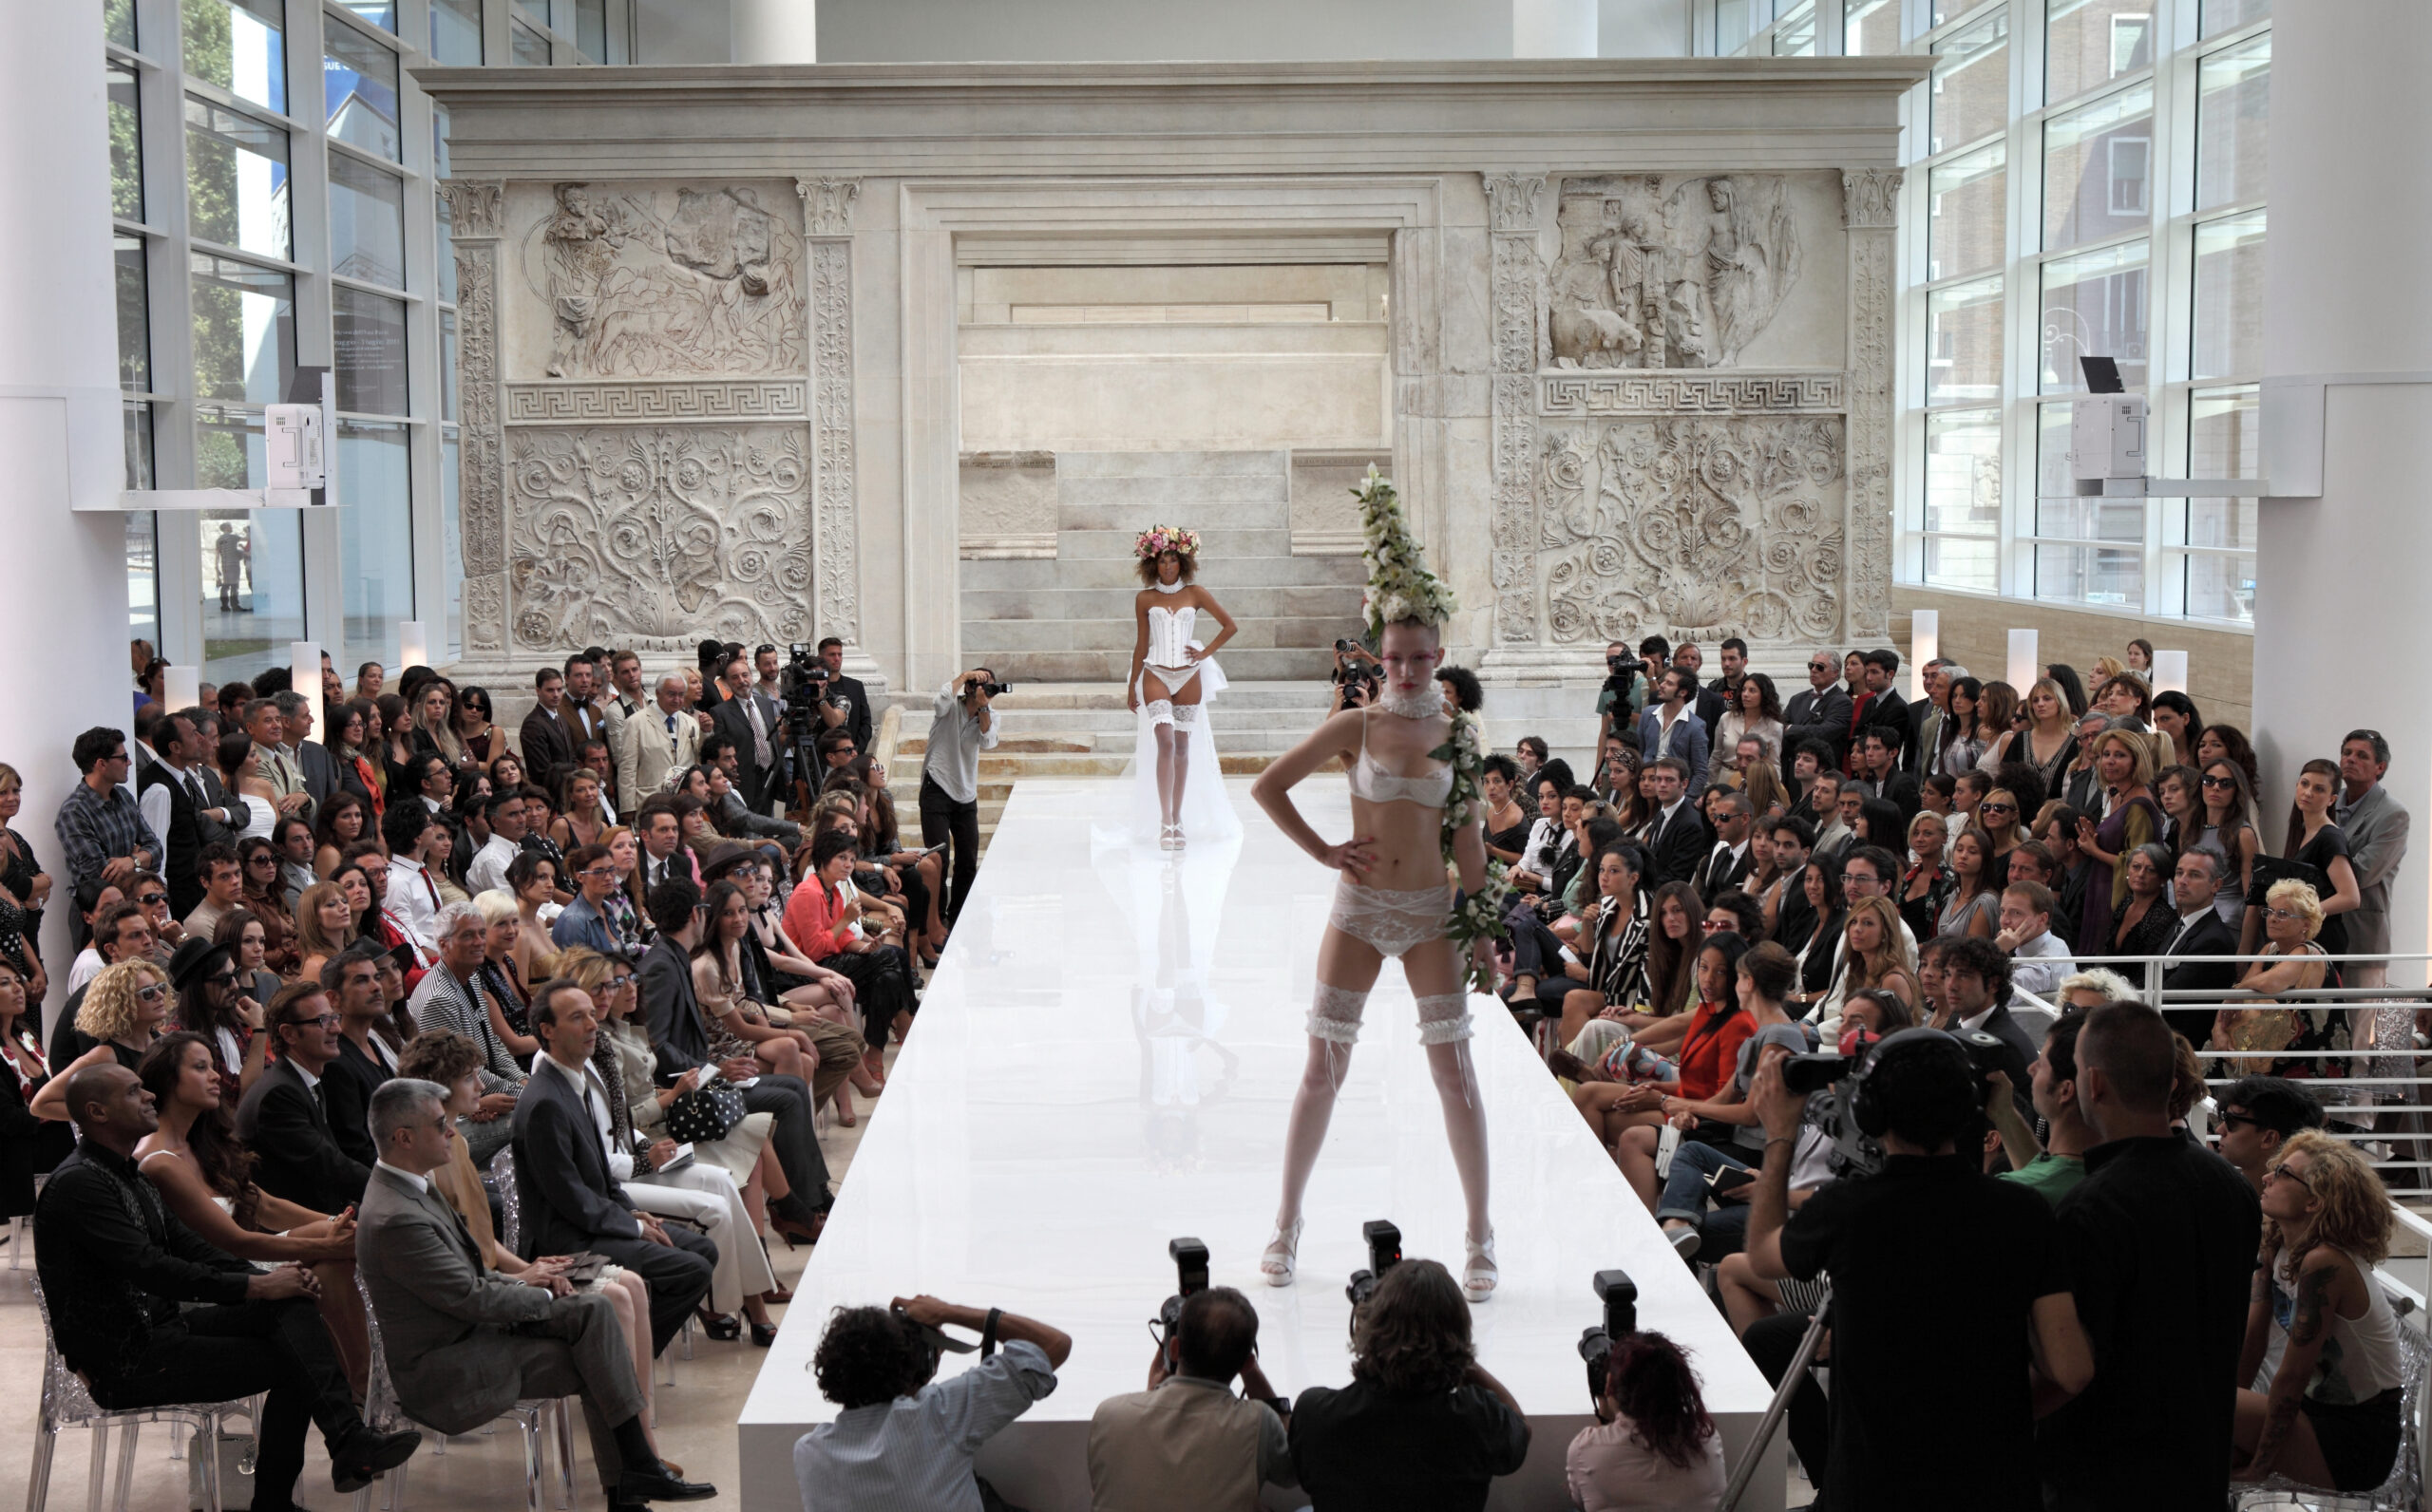 TO ROME WITH LOVE - Directed by Woody Allen - Int. Fashion Show - ©2012 - Sony Pictures